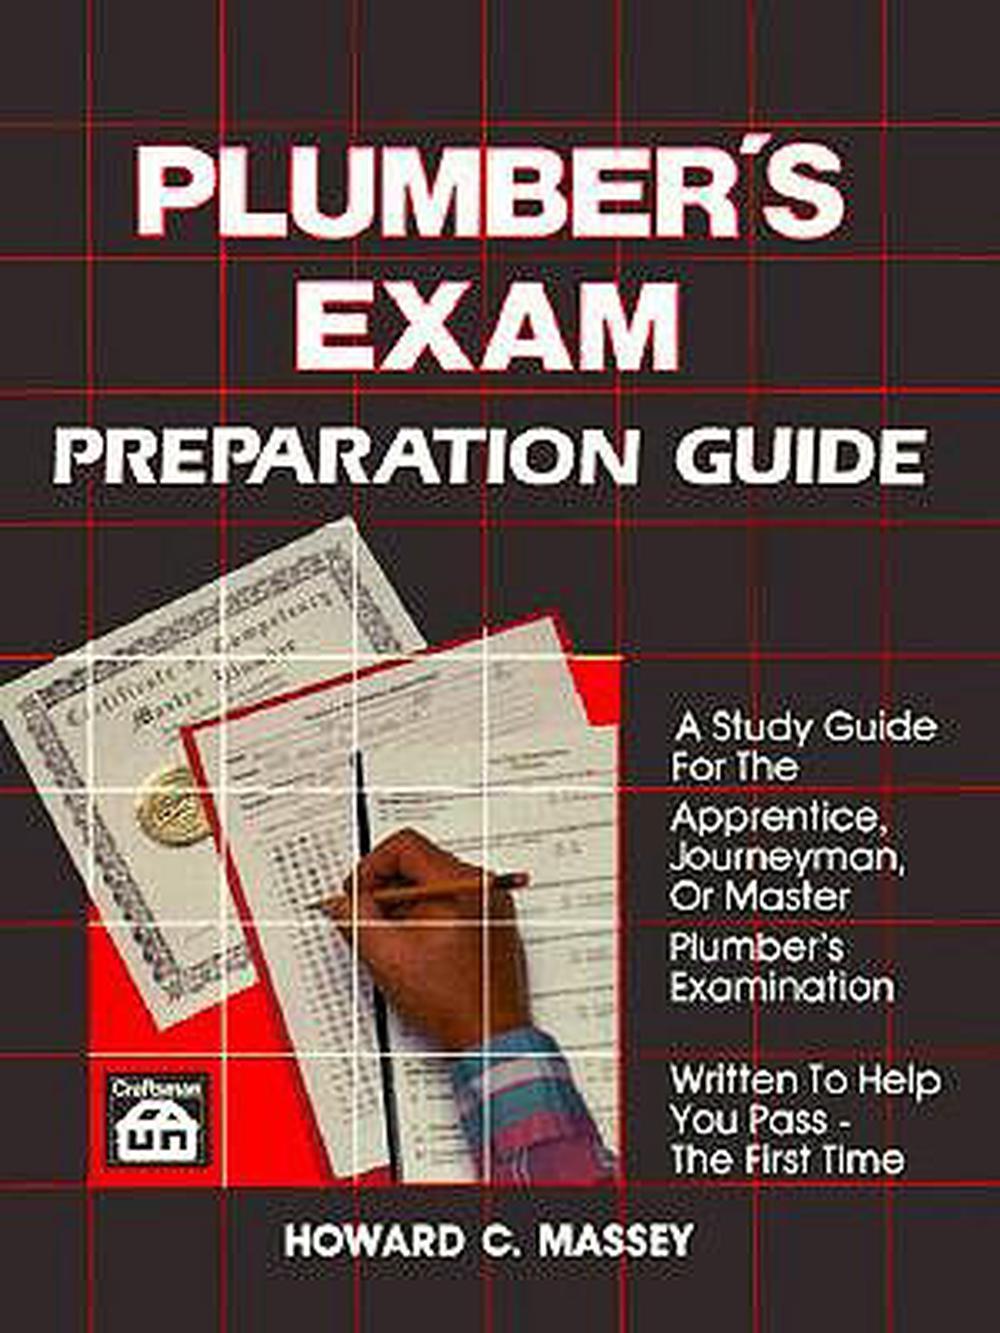 Connecticut plumber installer license prep class download the last version for iphone